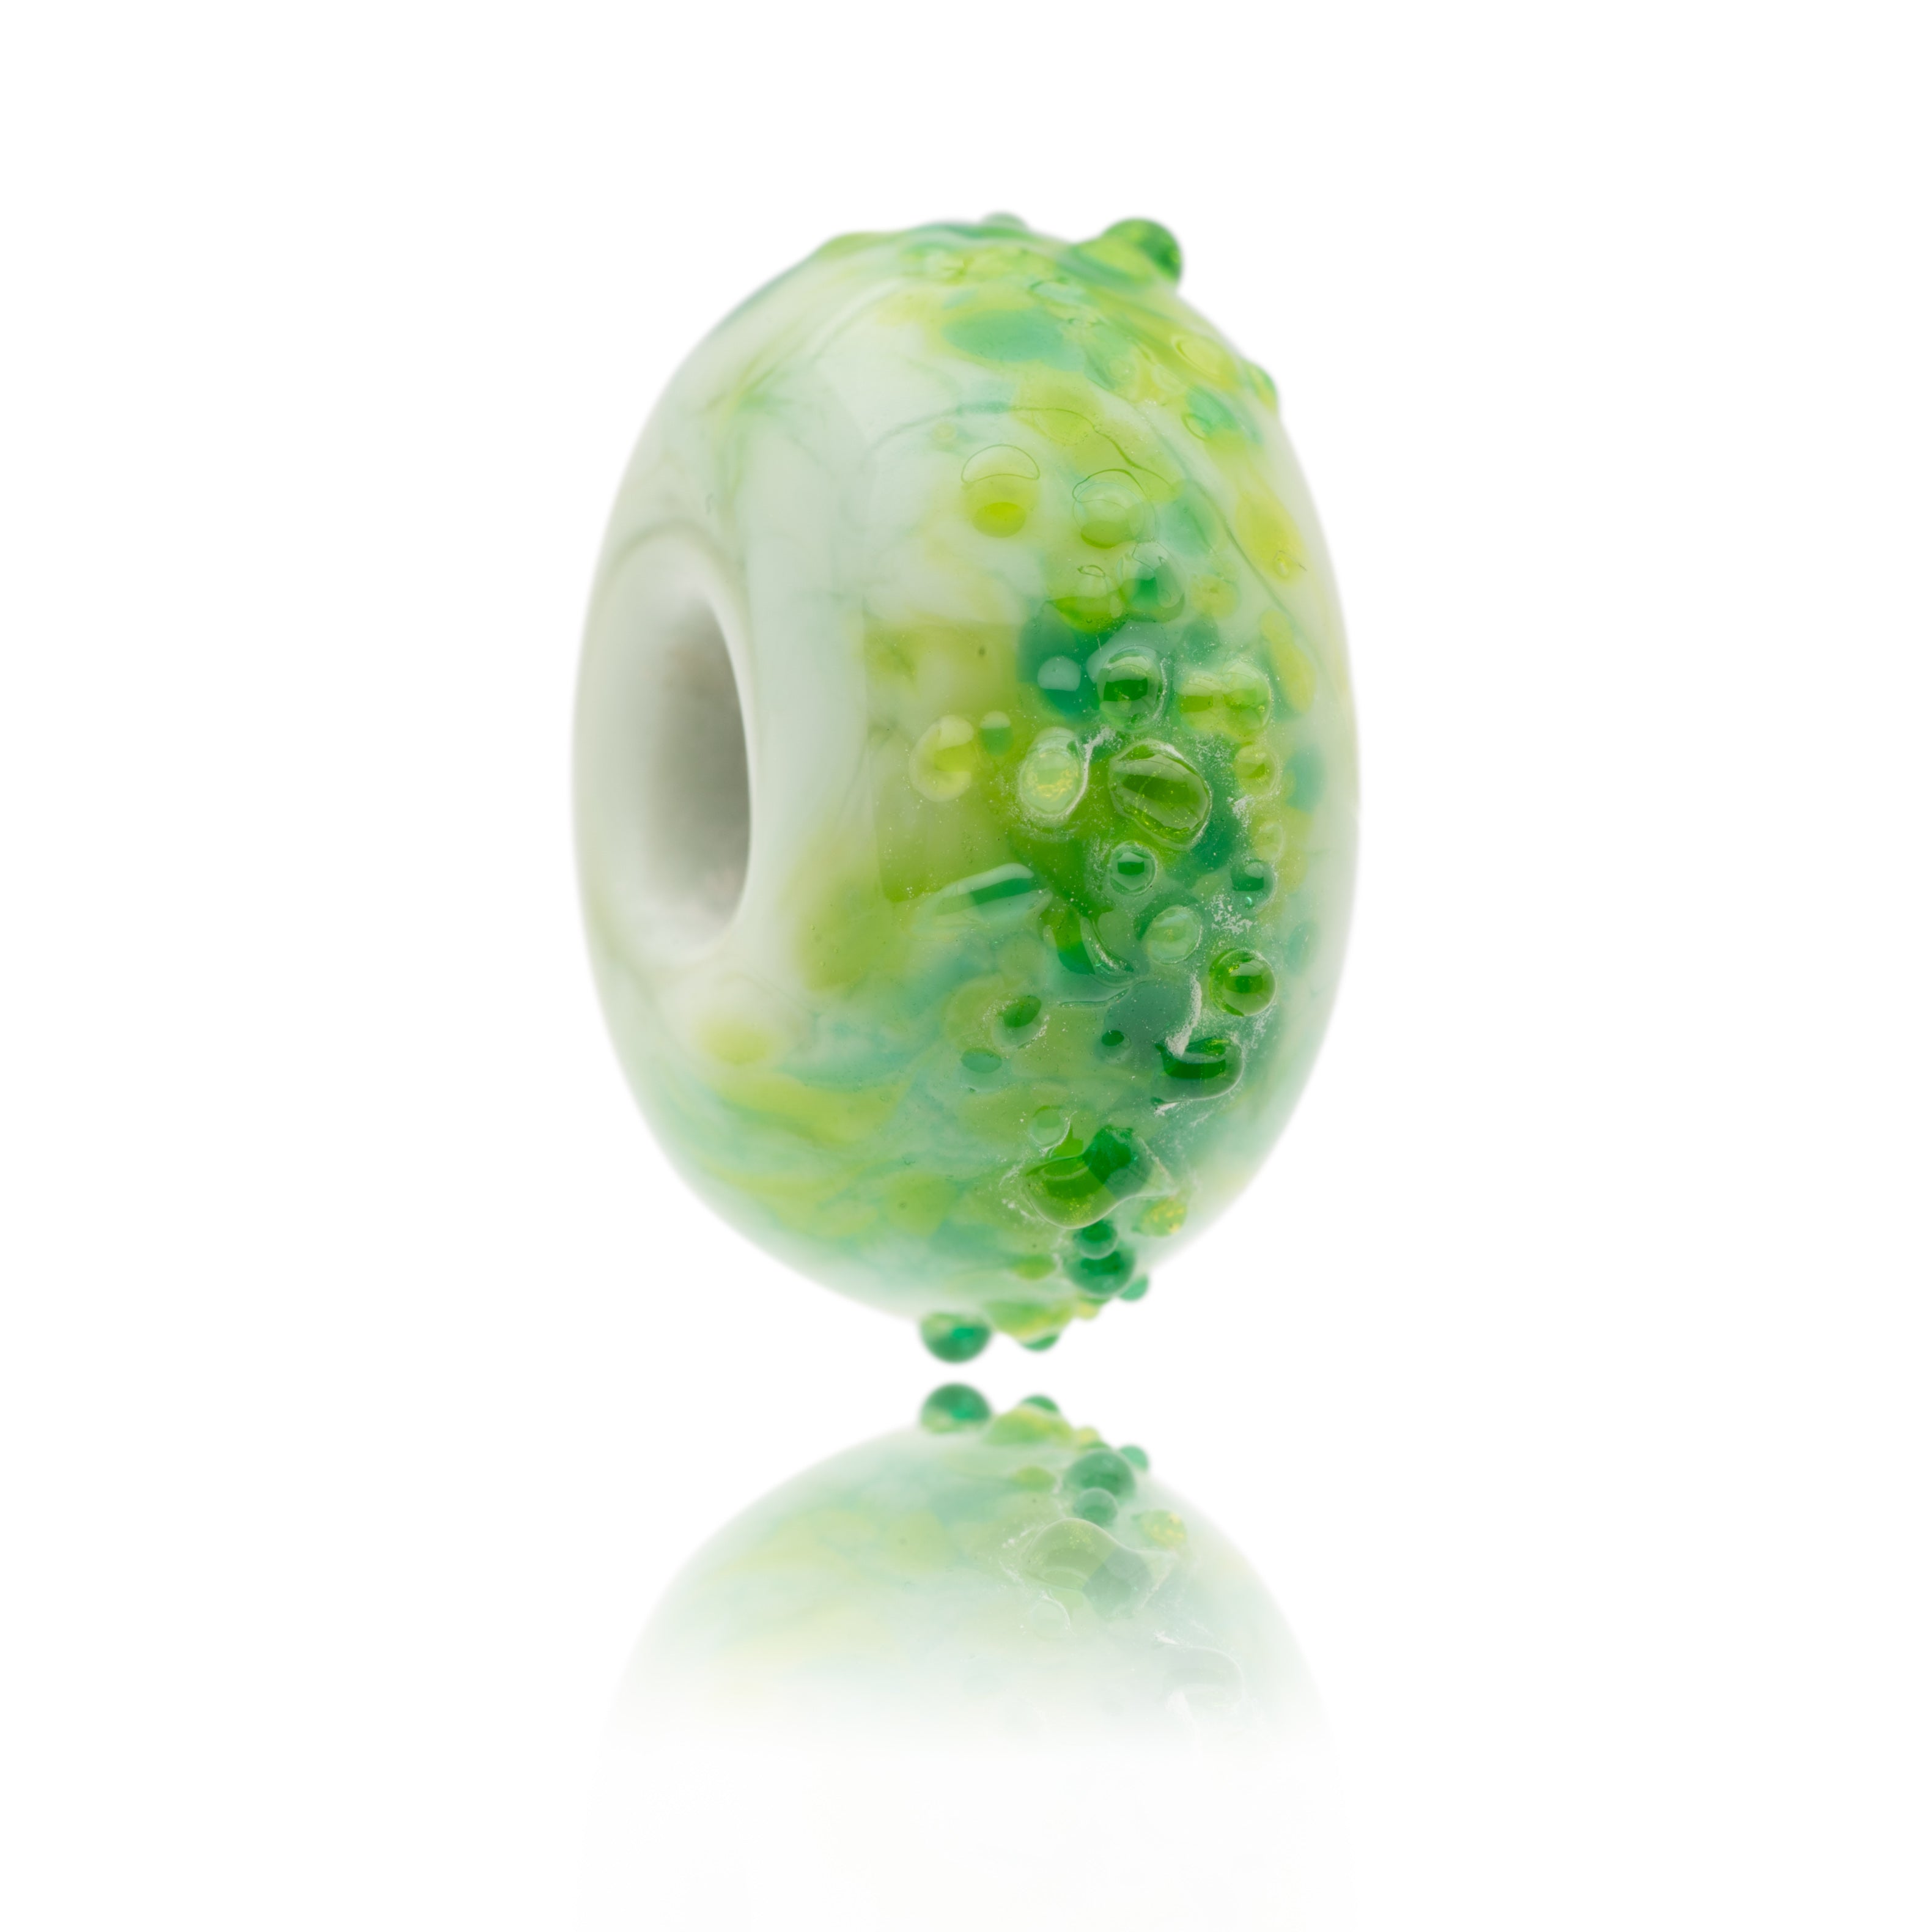 Green glass bead with shards of light and dark green glass on the surface. This bead represents Ballybunion in Ireland.